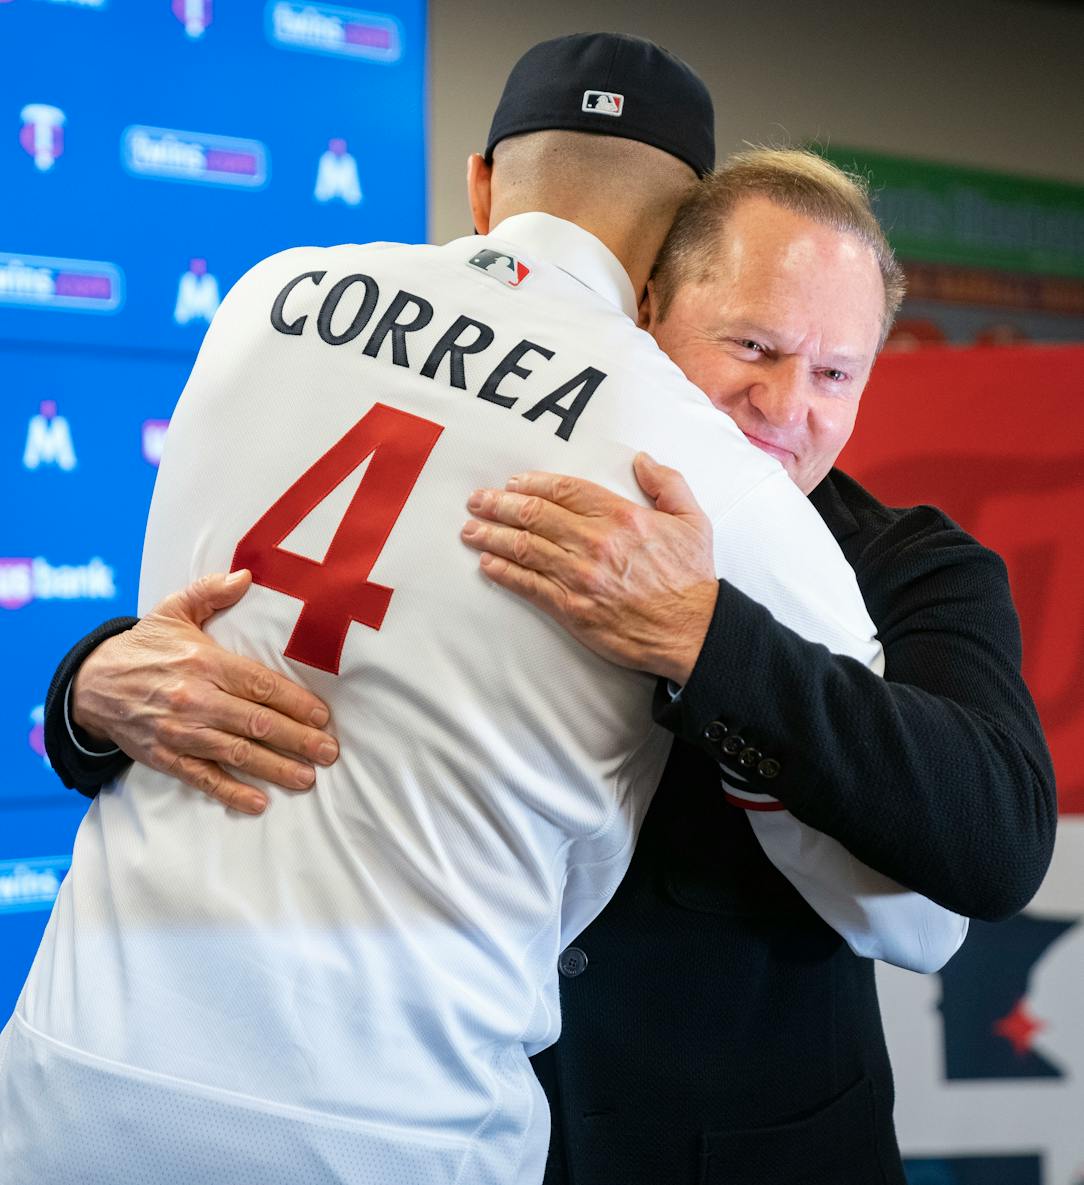 Carlos Correa says 'my heart was here' after re-joining Twins